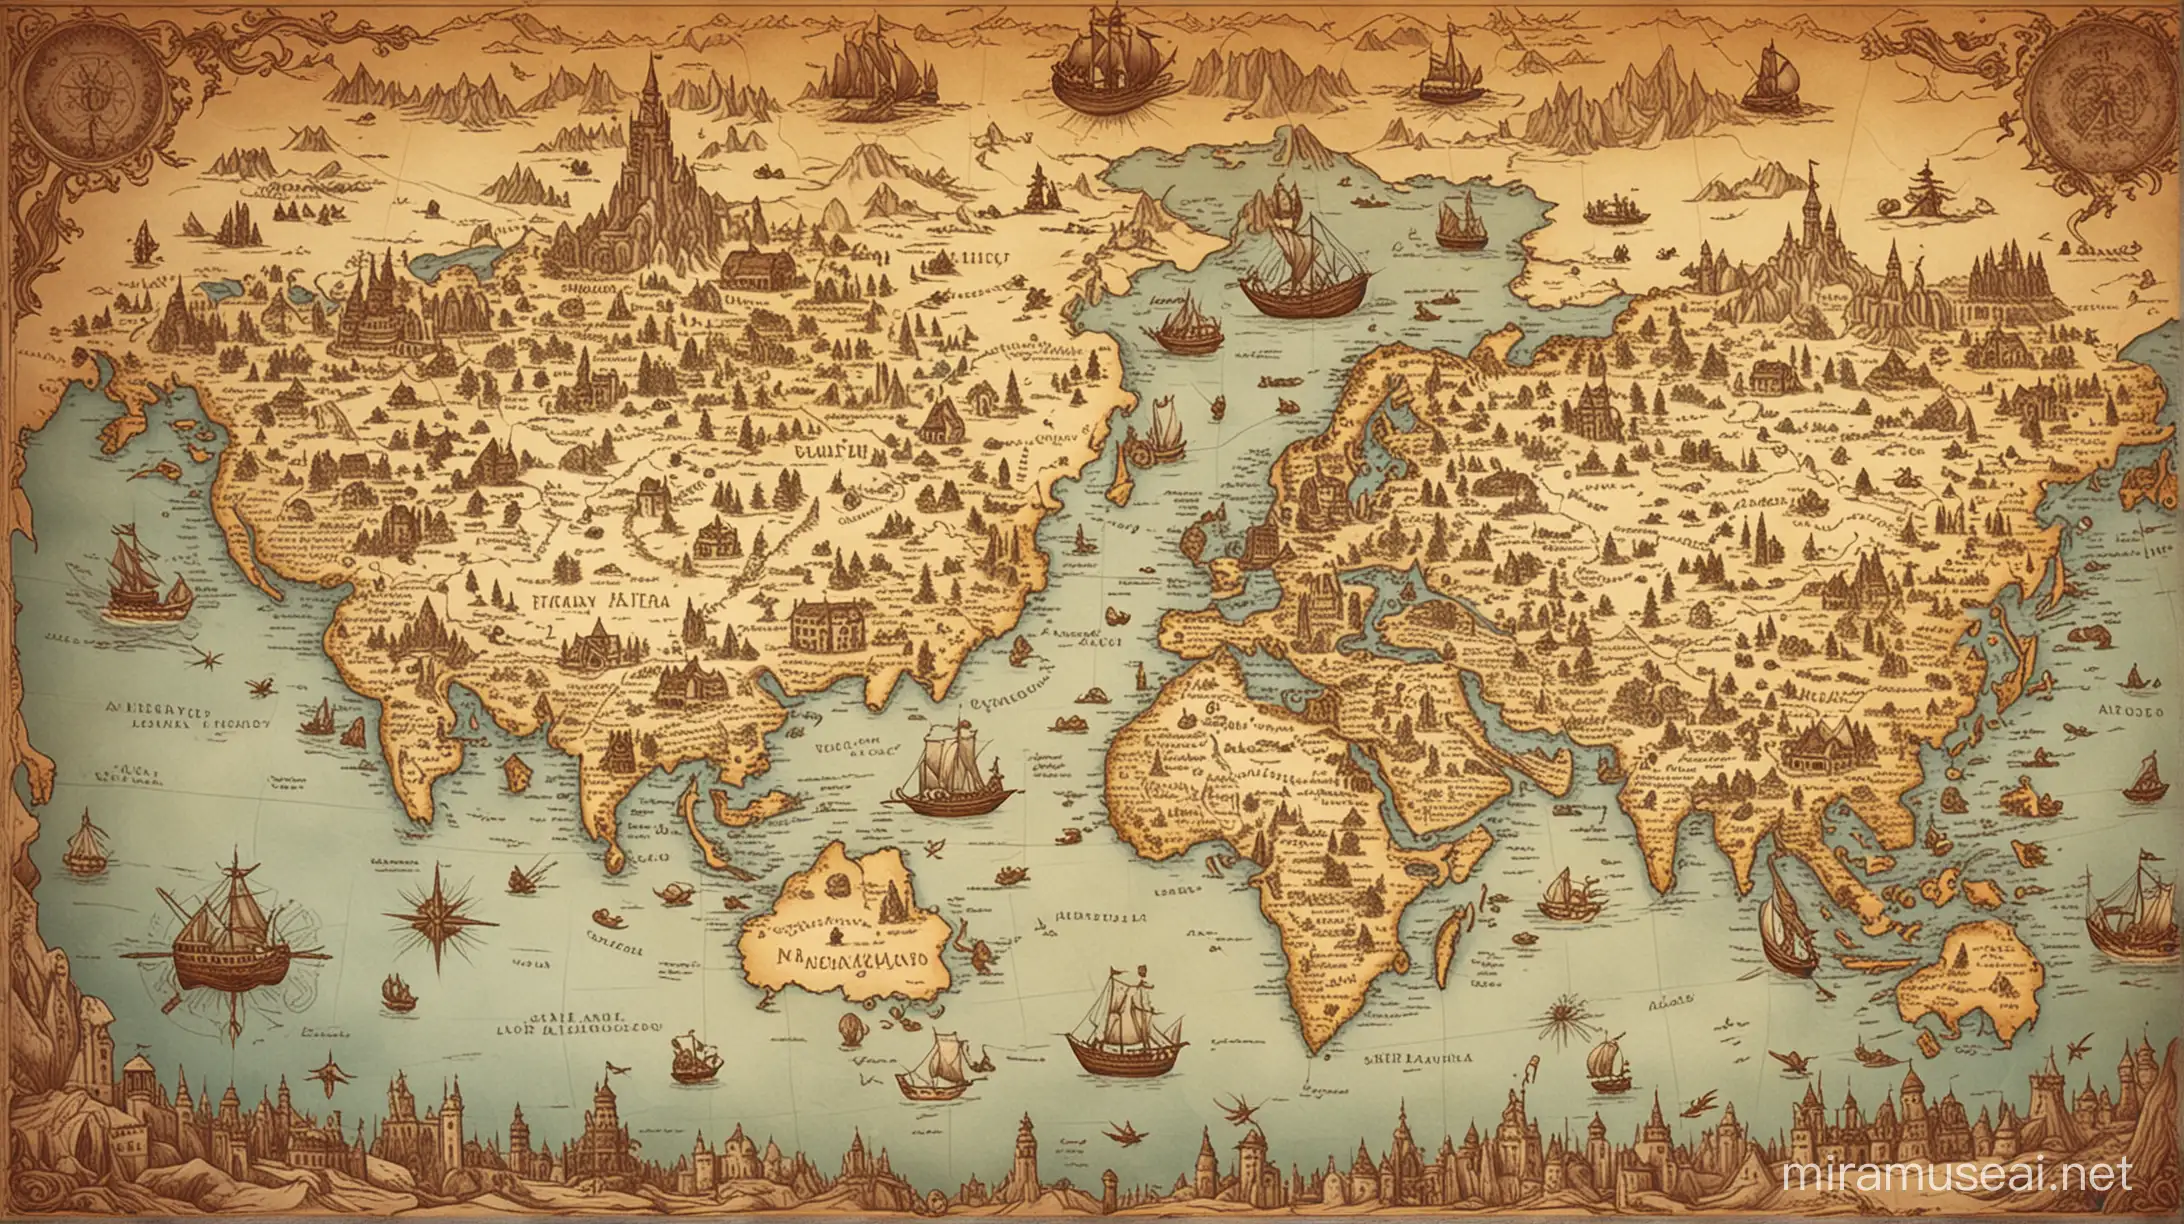  A fantasy world map with many diffrent places